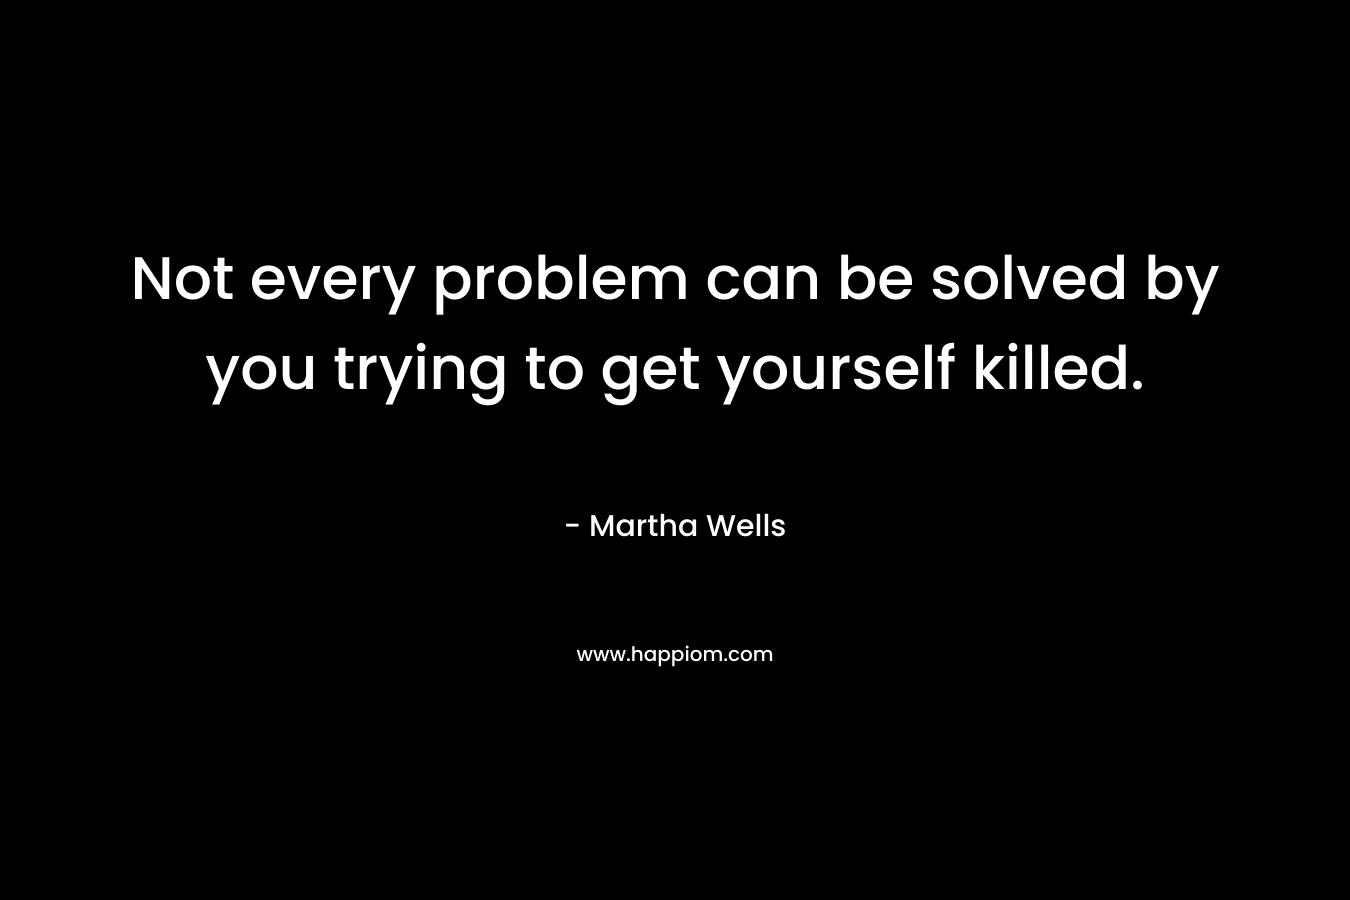 Not every problem can be solved by you trying to get yourself killed. – Martha Wells